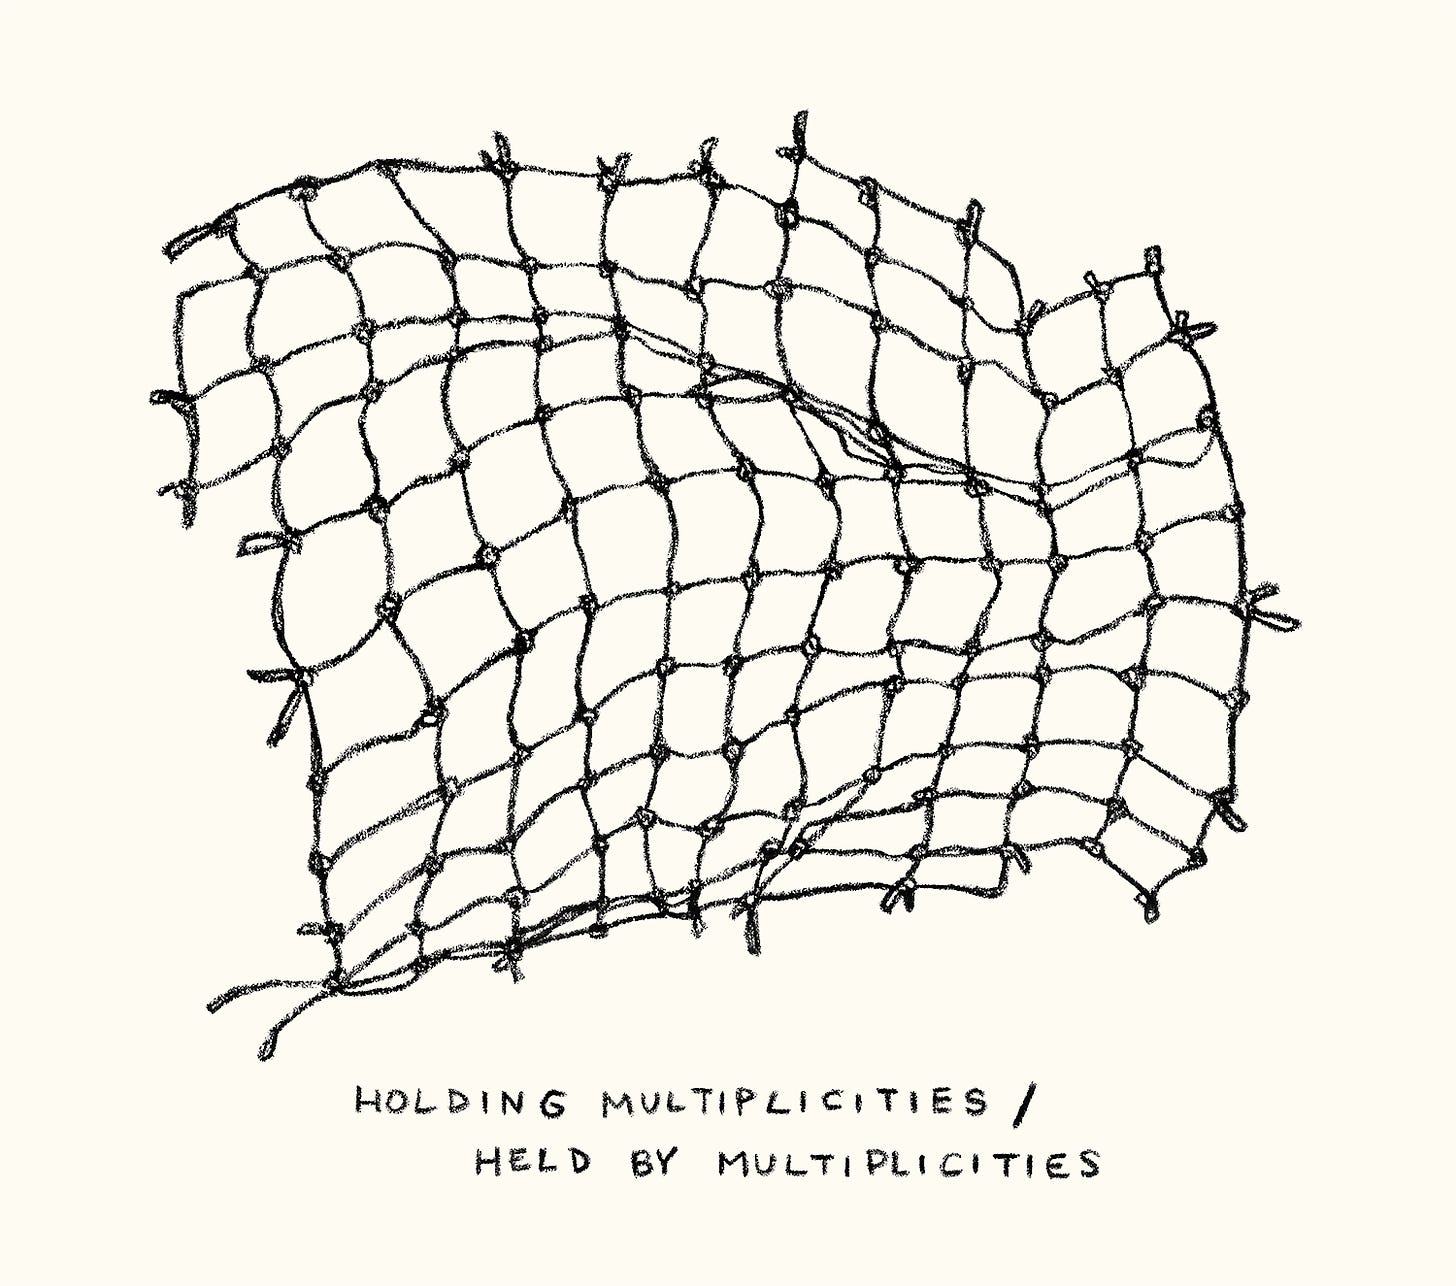 A black and white illustration of a net with the following text at the bottom: "Holding multiplicities / Held by multiplicities"